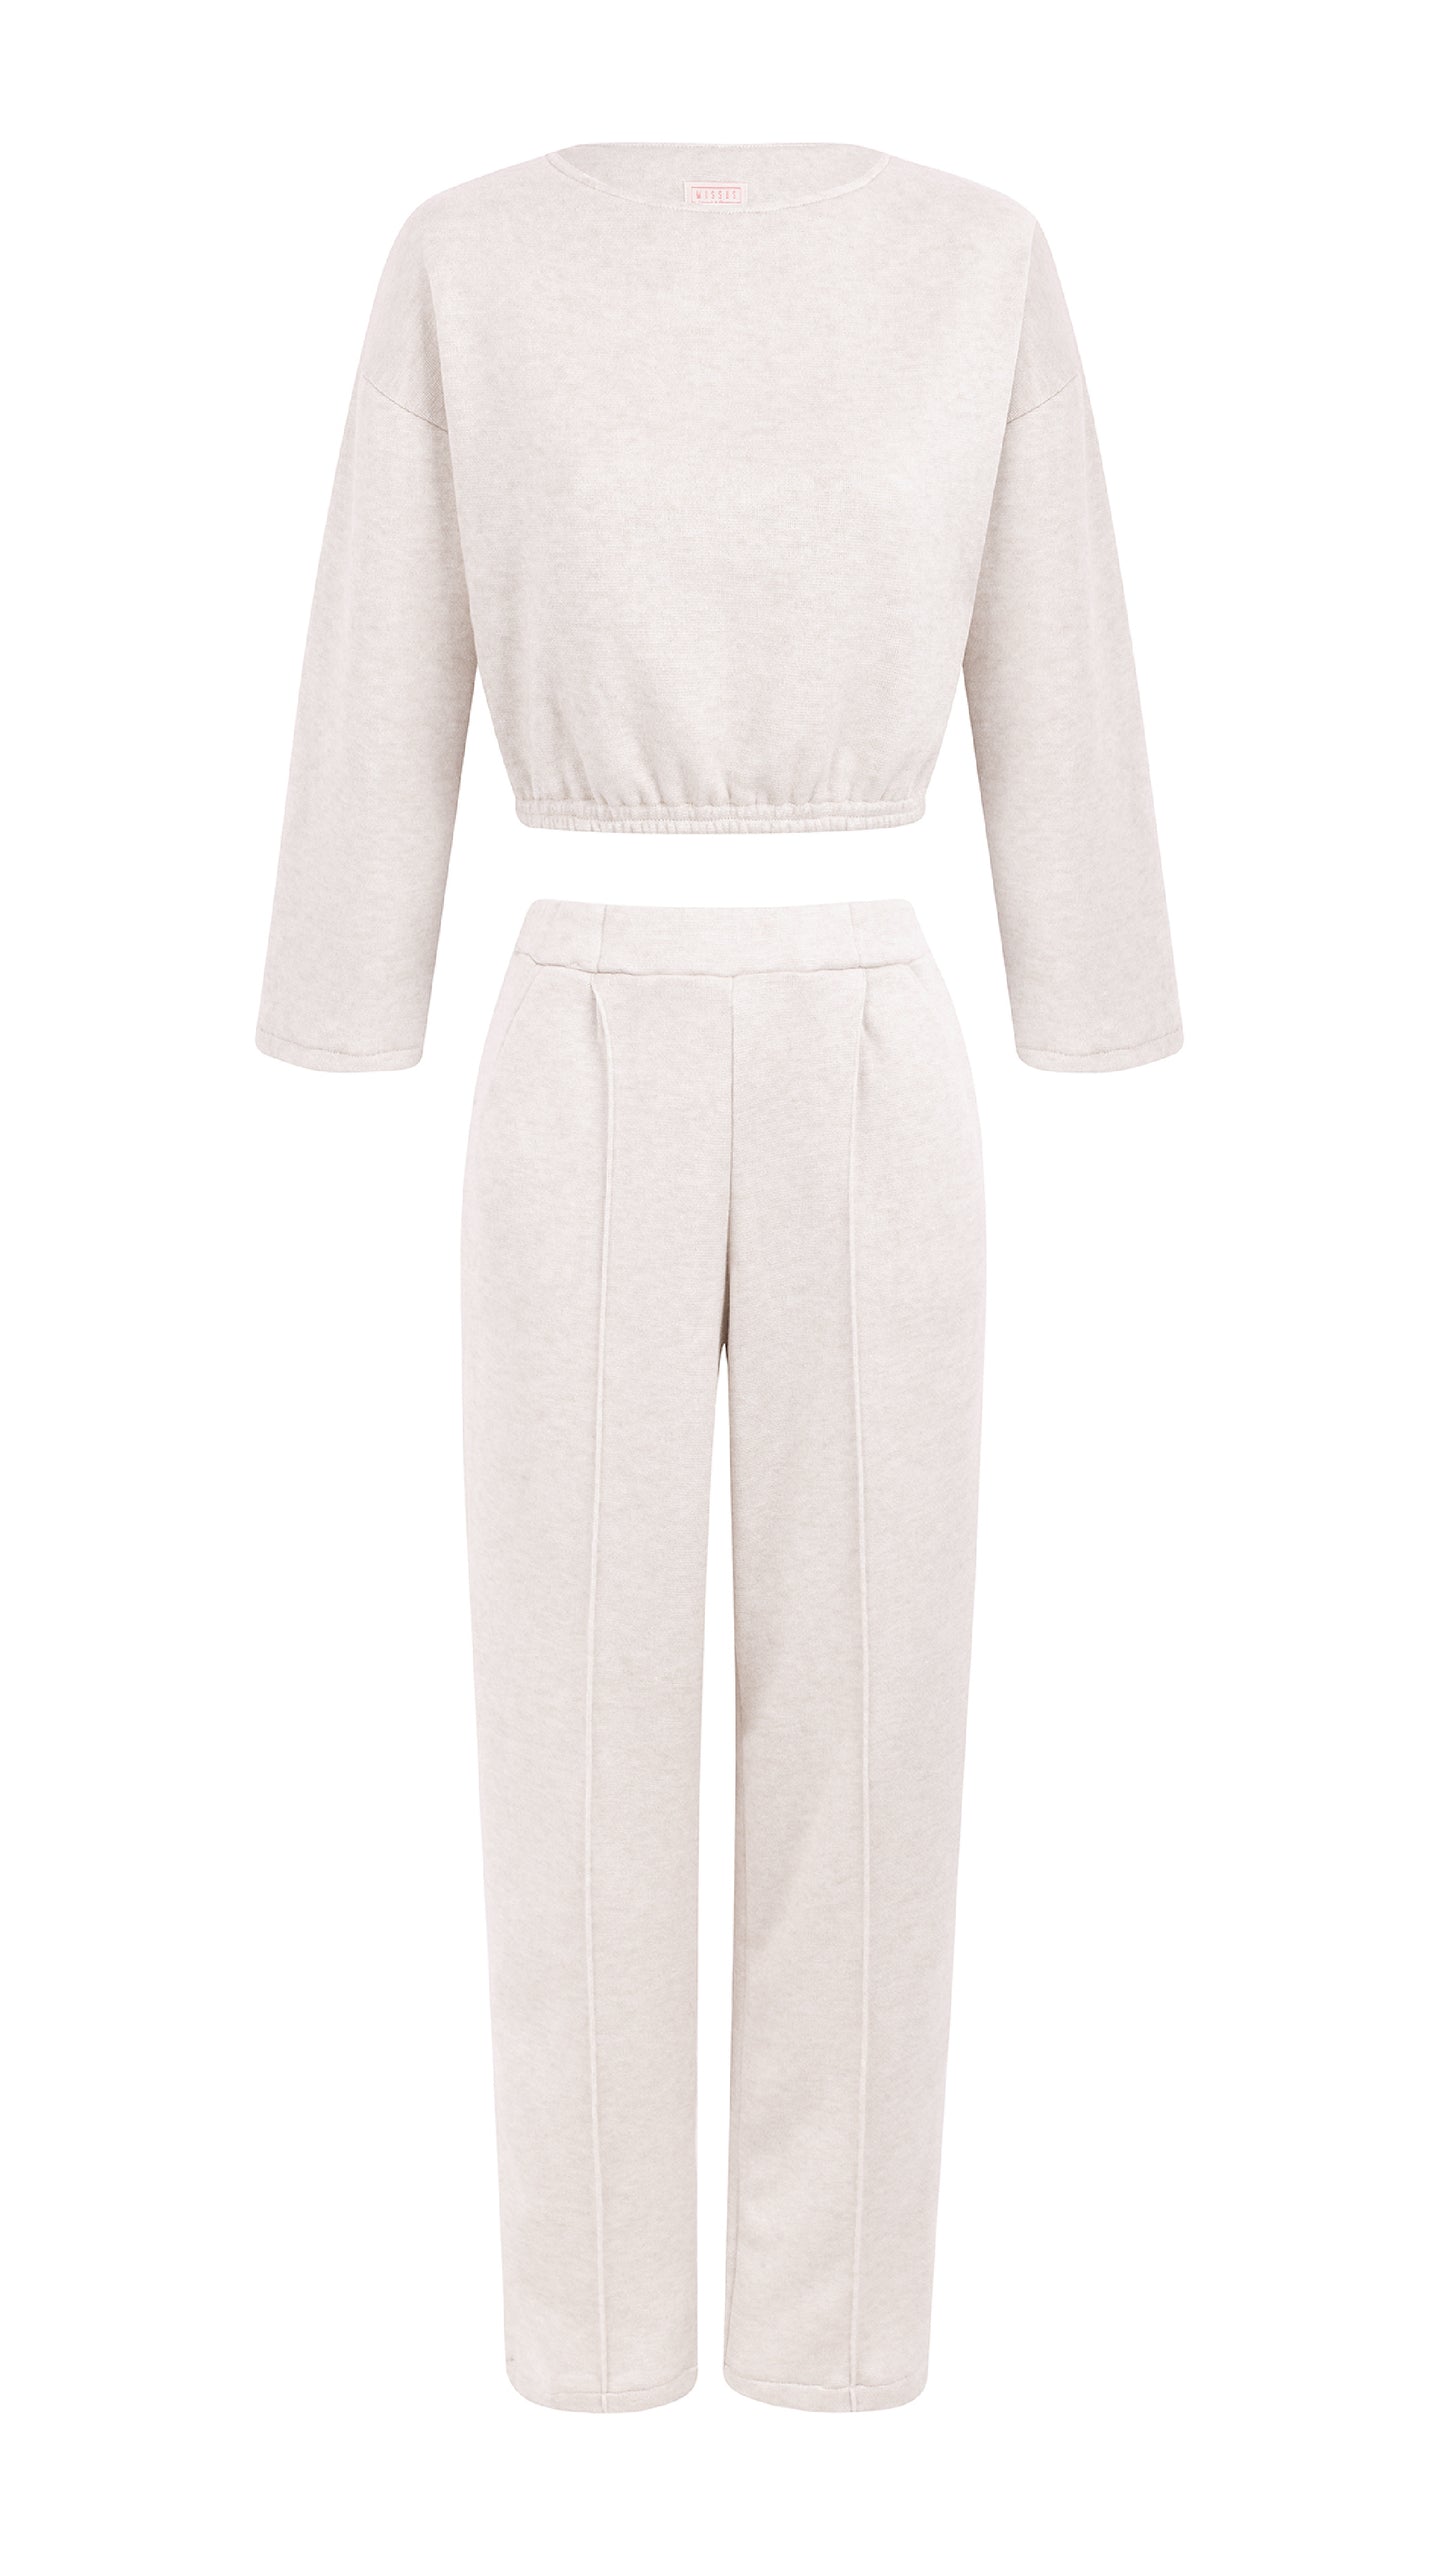 OFF-WHITE LOUNGEWEAR SET (OUT OF STOCK)